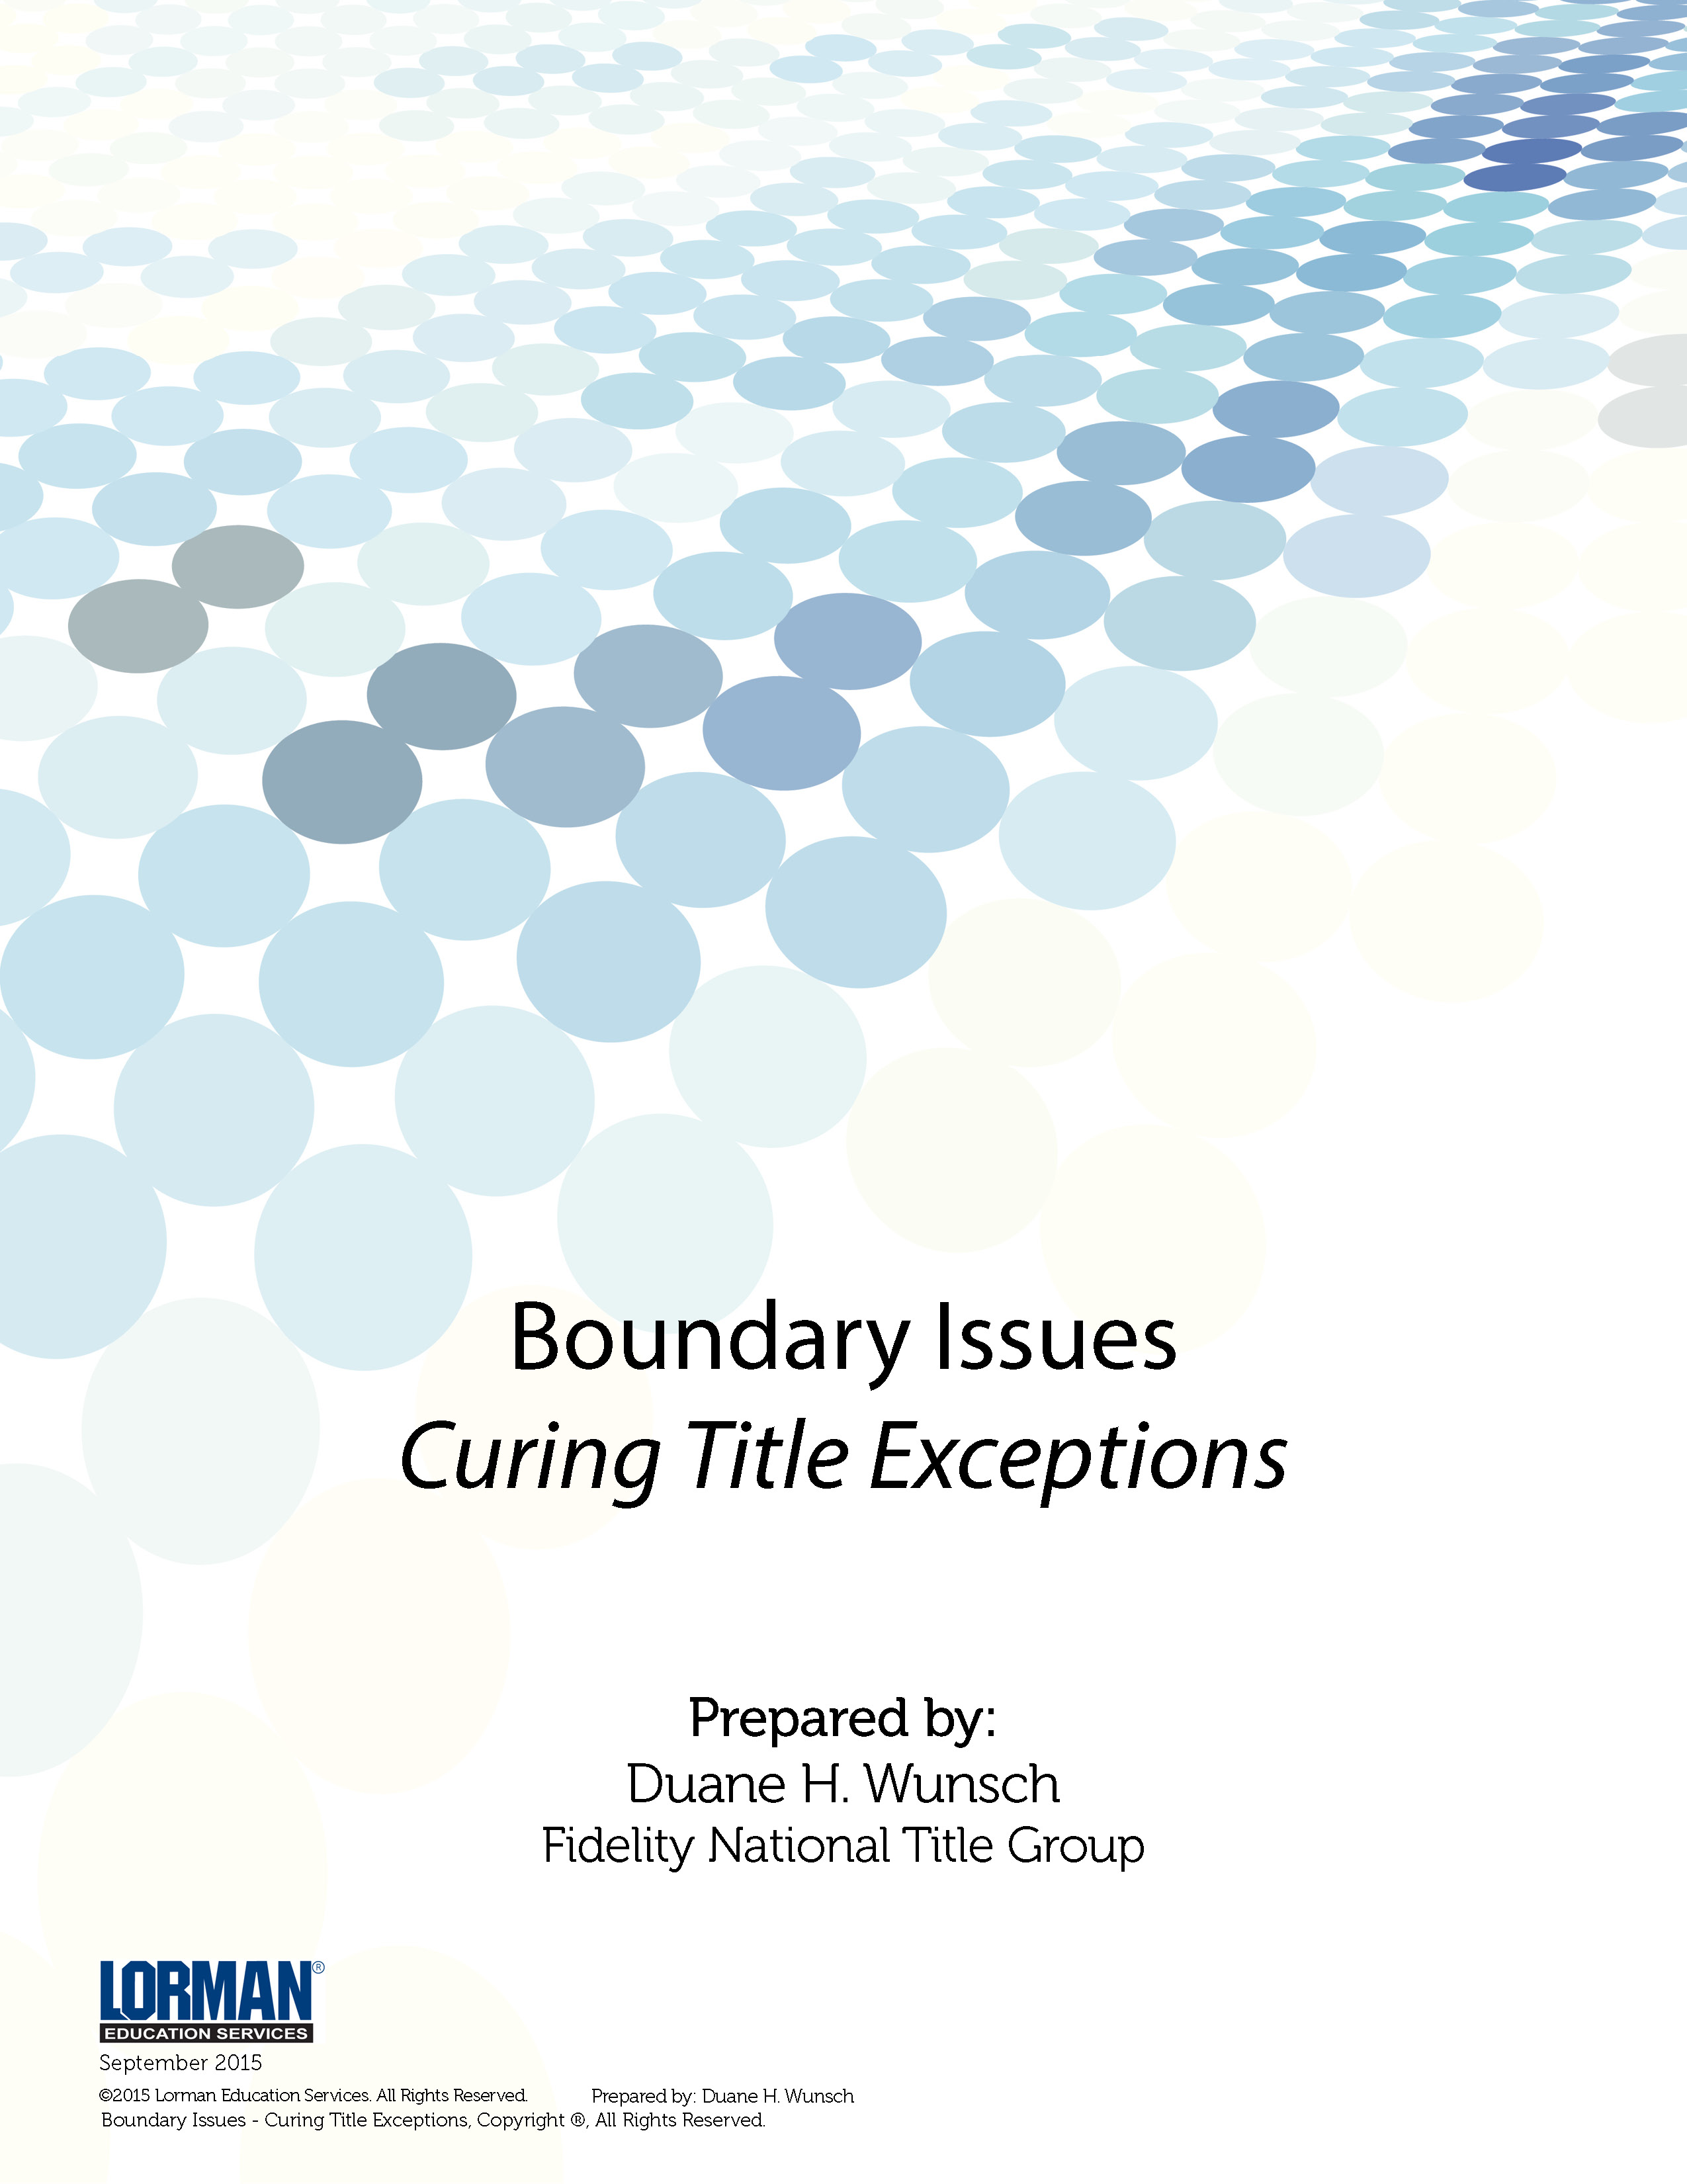 Boundary Issues - Curing Title Exceptions